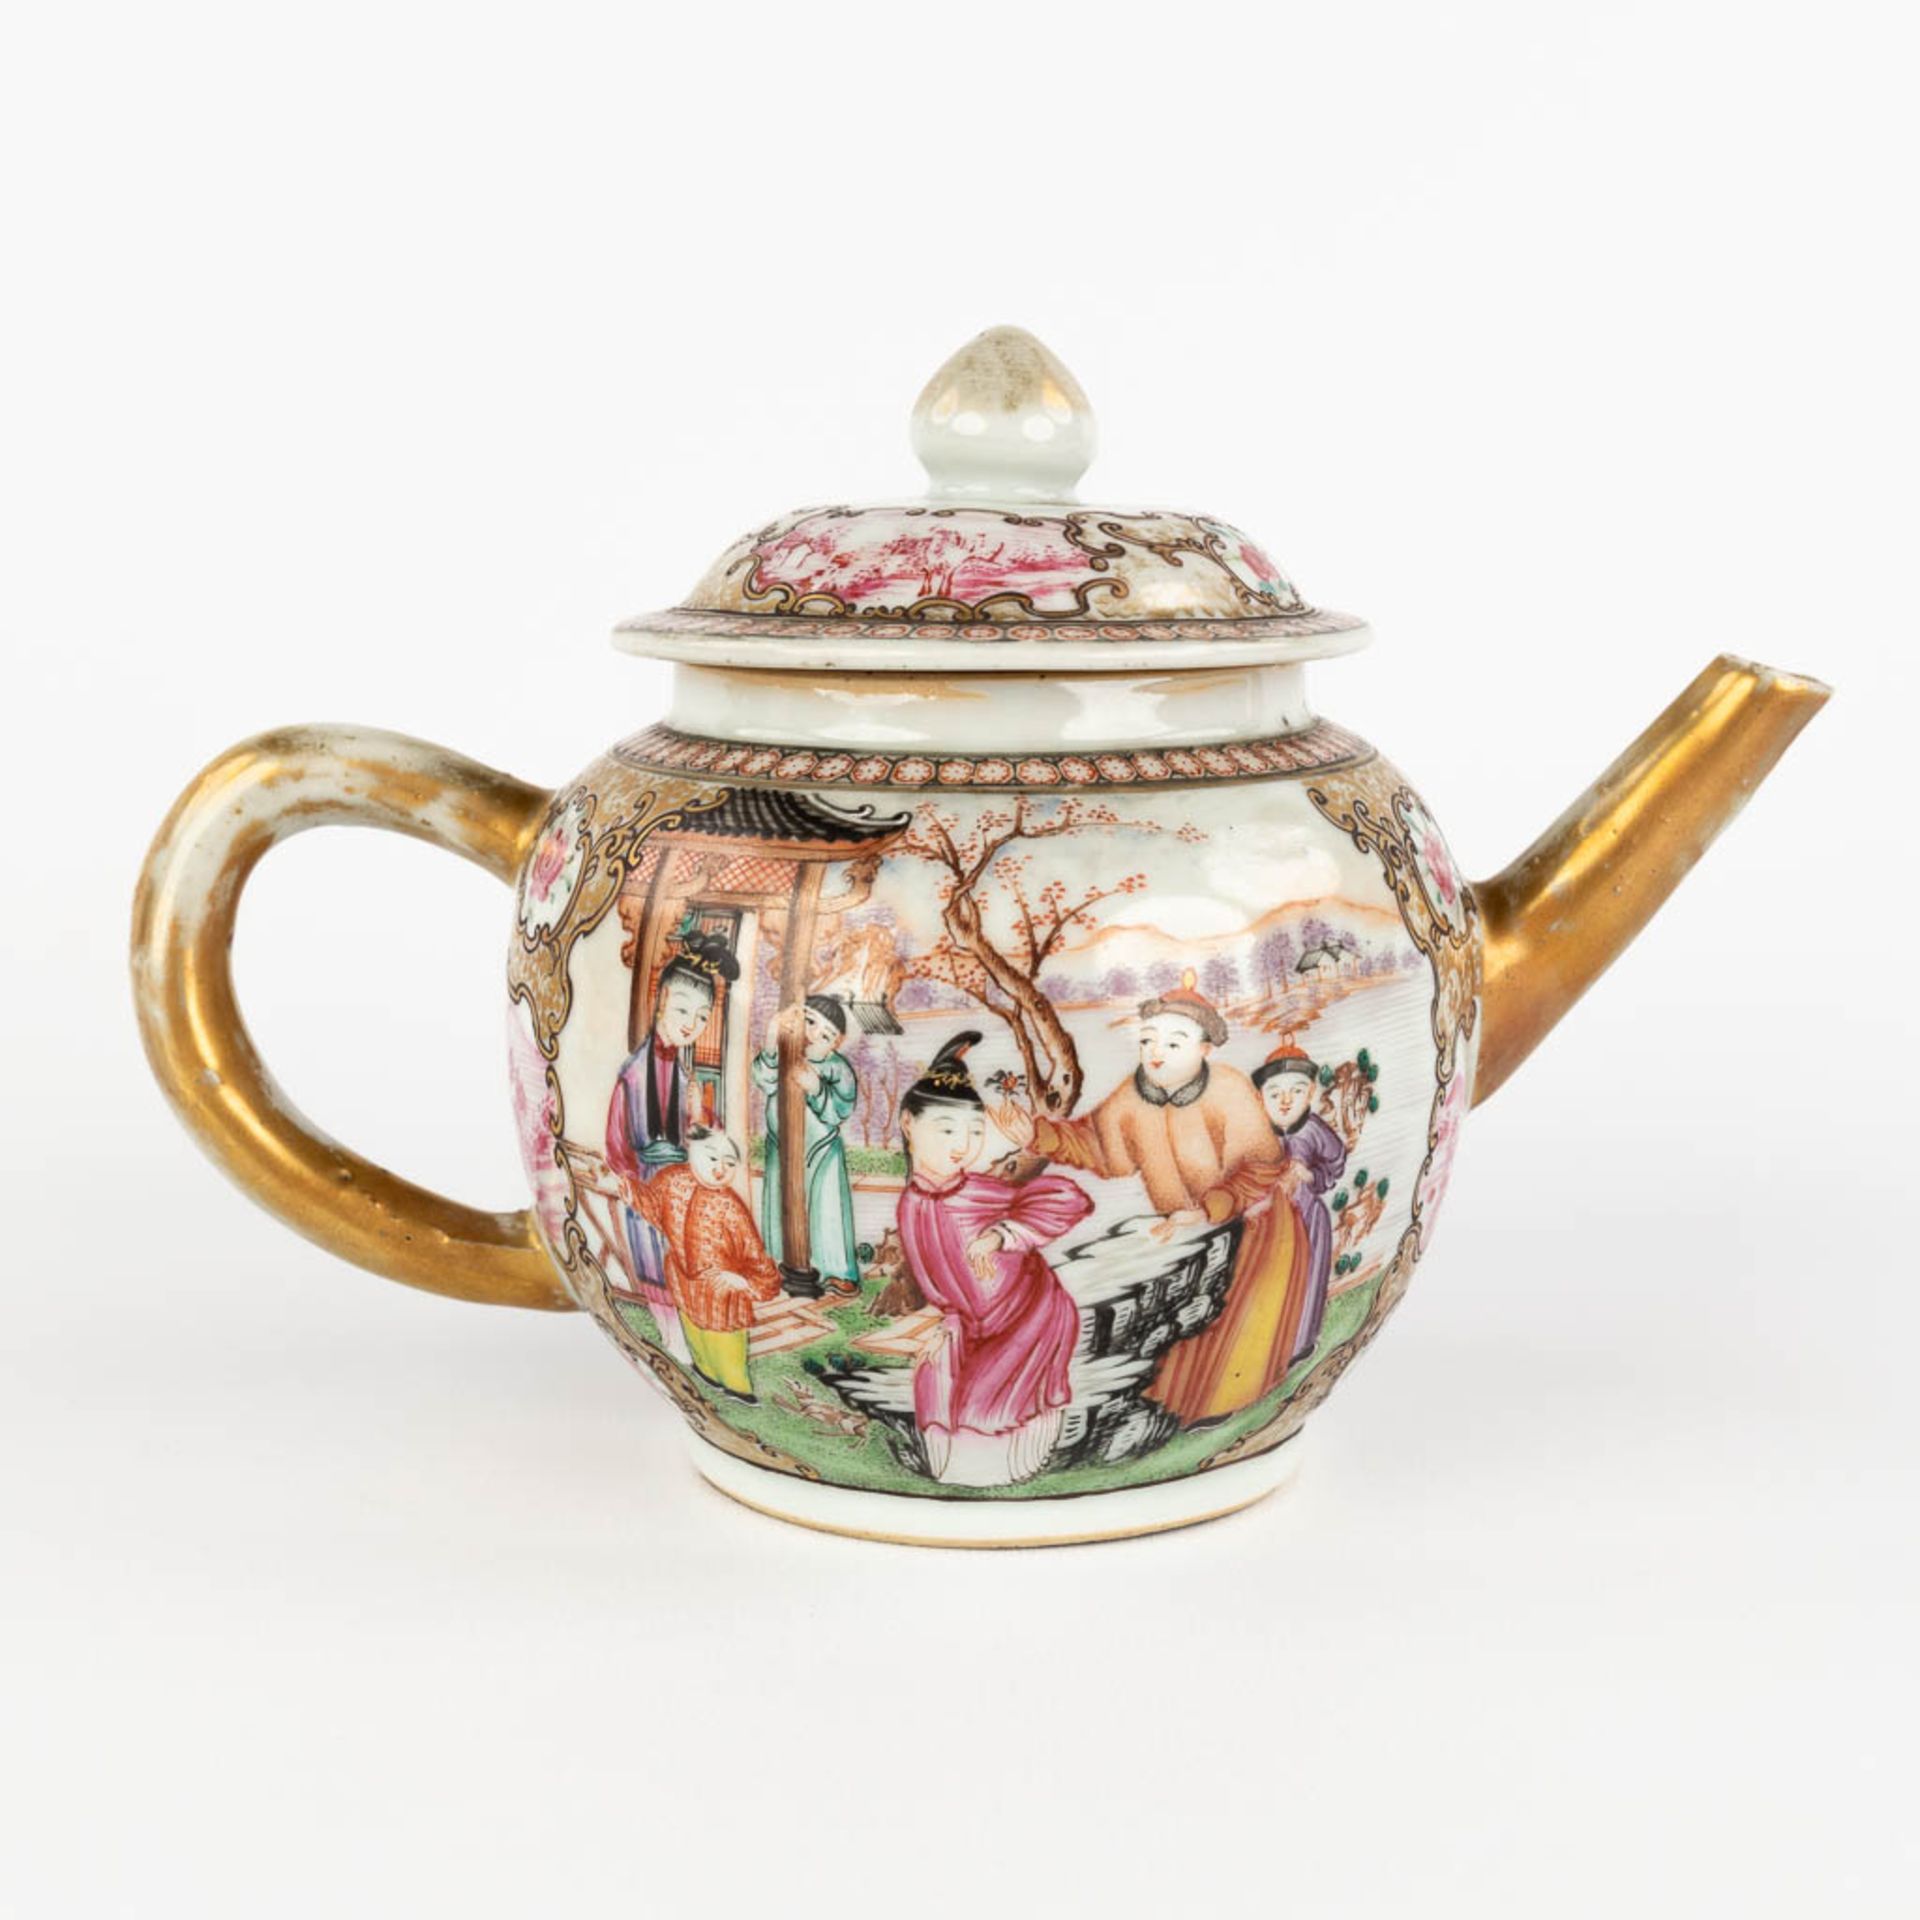 An antique Chinese Famille Rose teapot with a Family Scne, Qinalong, 18th C. (L:11 x W:20 x H:12,5 - Image 3 of 12